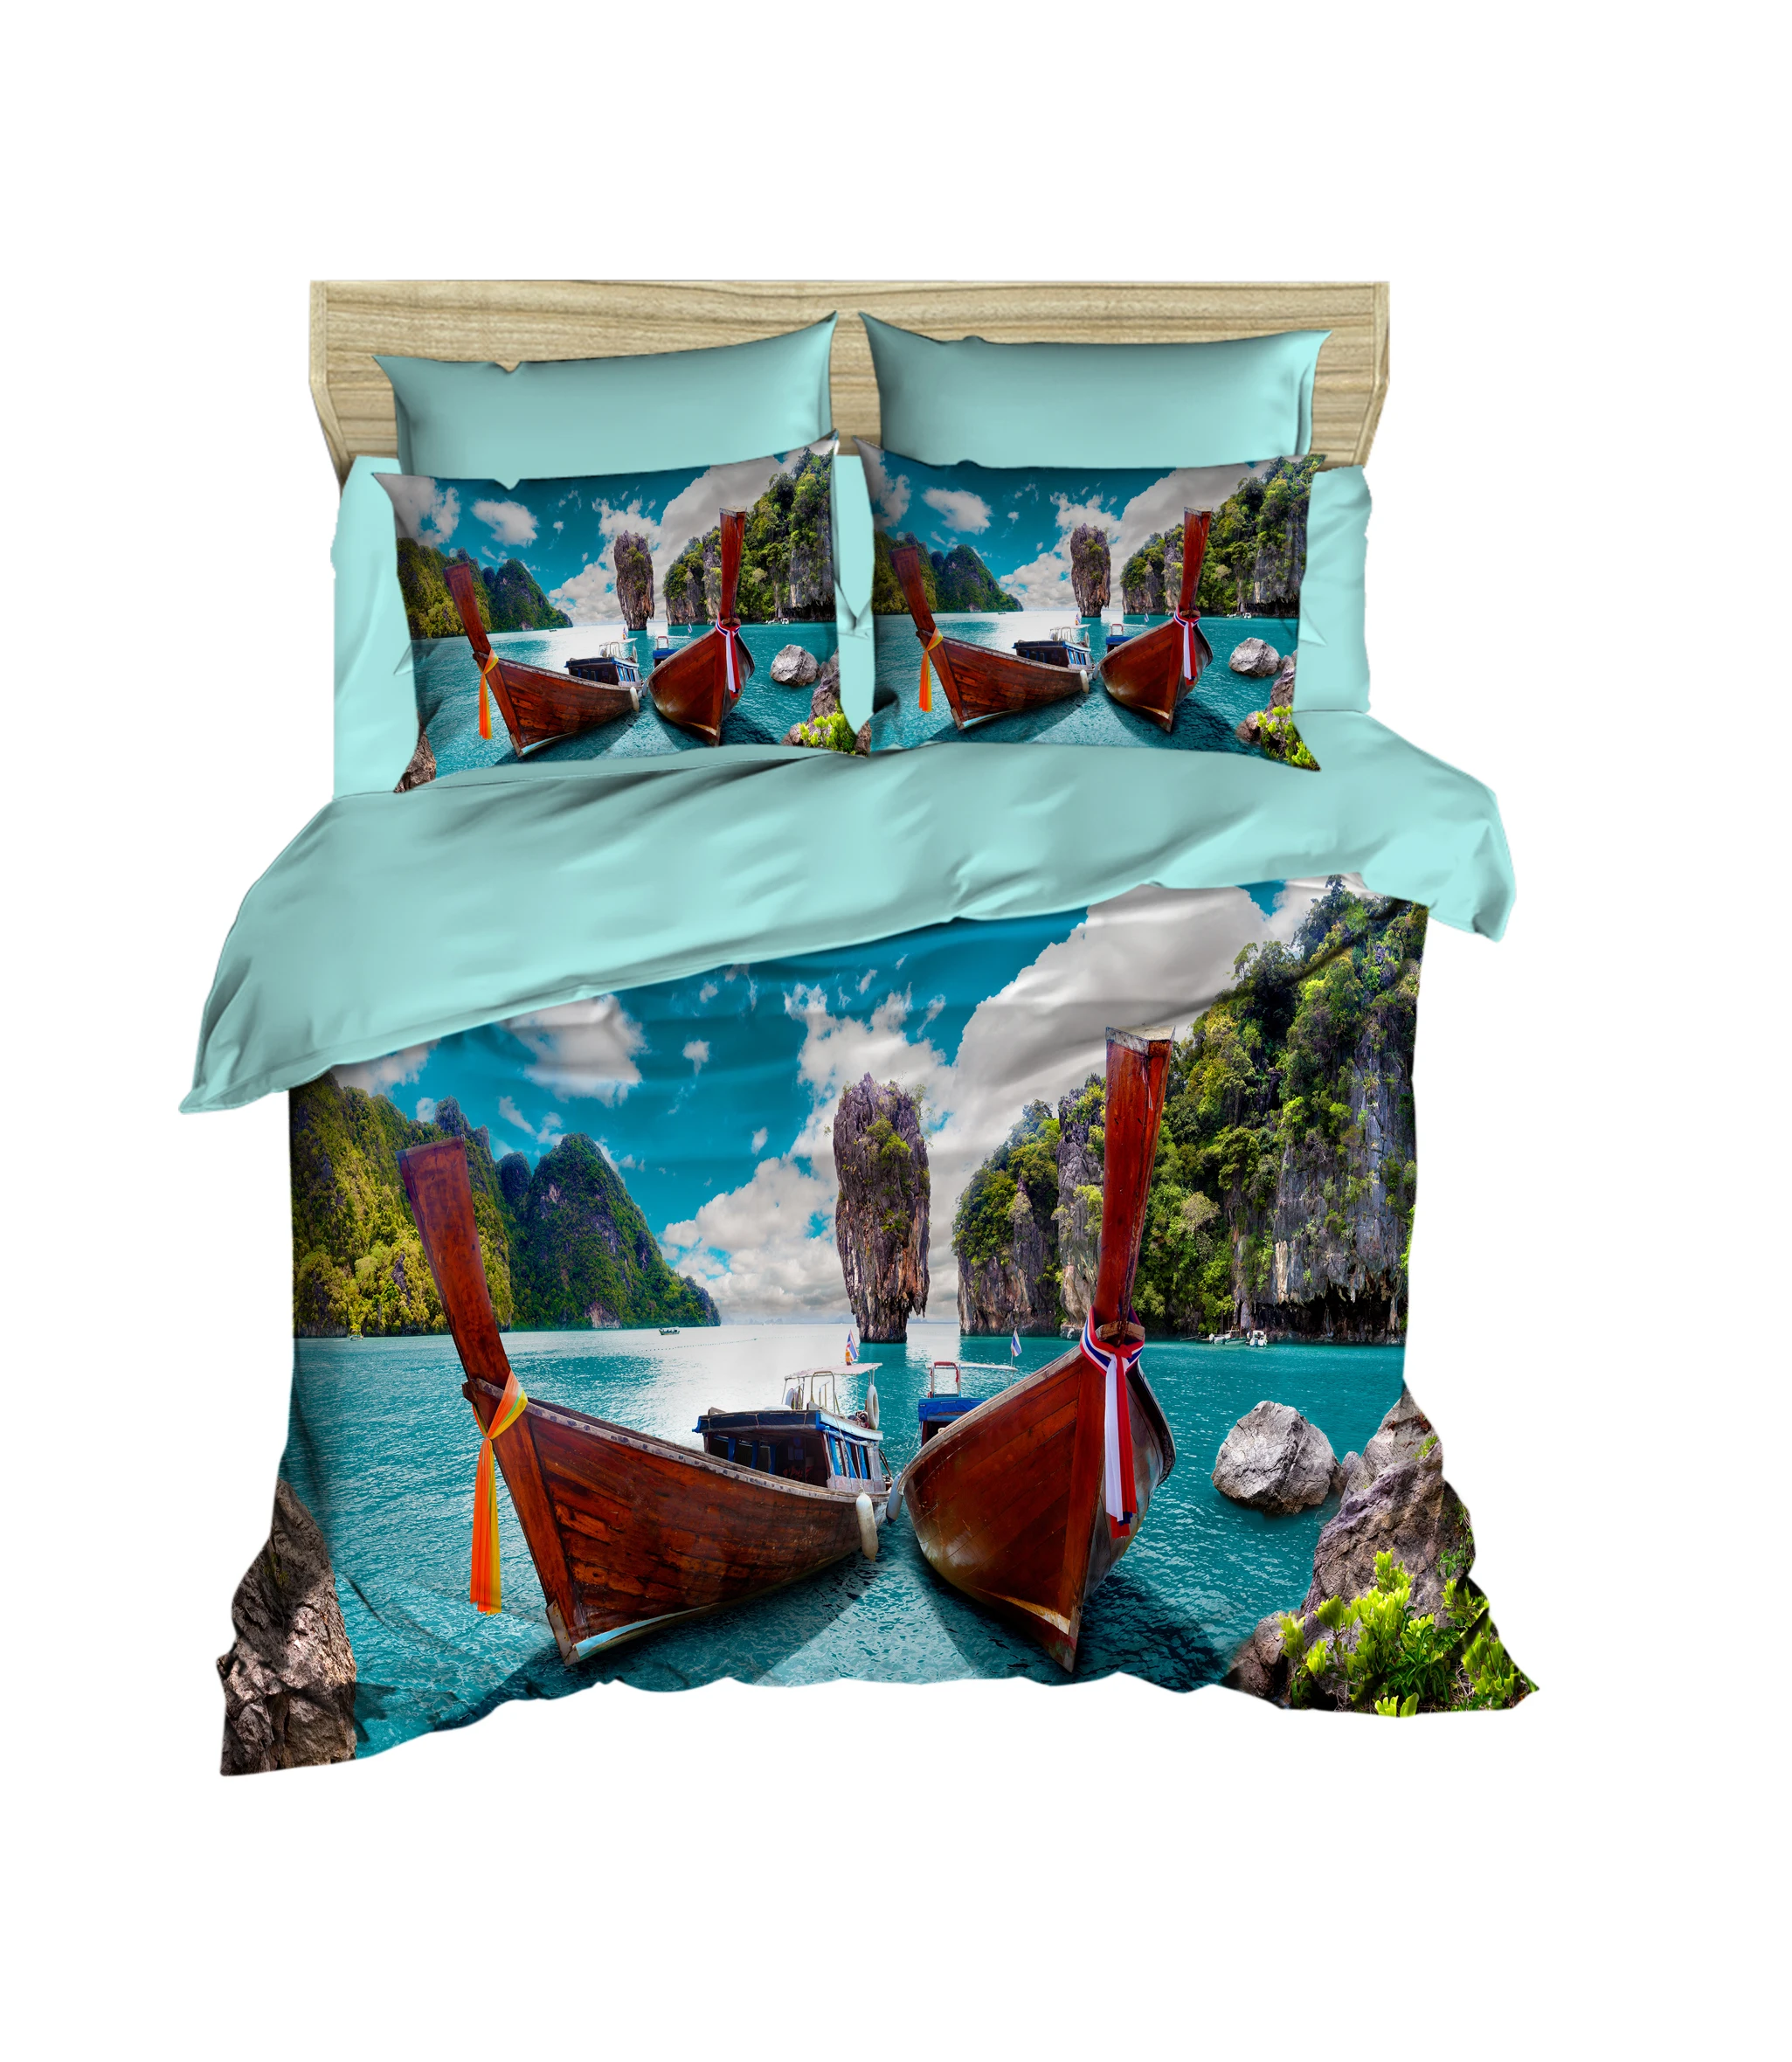 

100% Turkish Cotton Nautical Bedding Boats and Sea Themed 3D Printed Duvet Cover Set, All Sizes, Made in Turkey